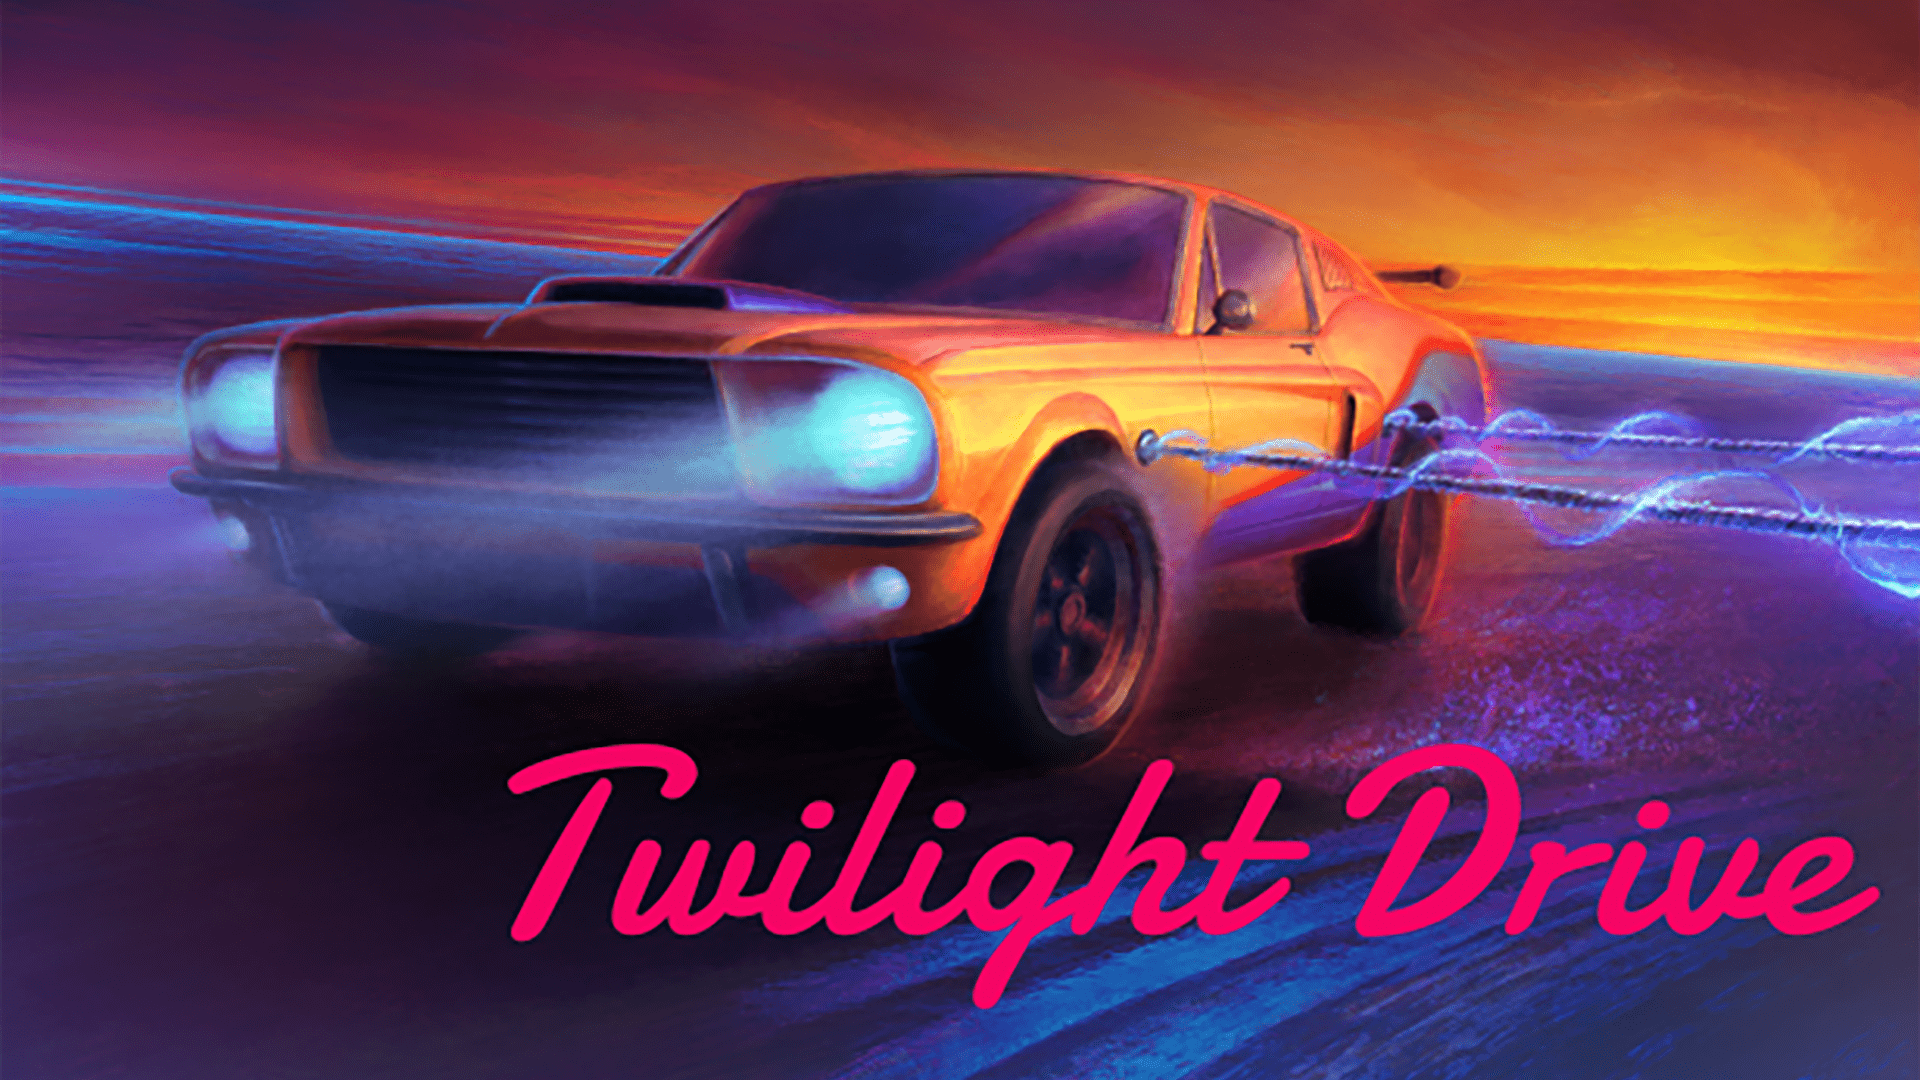 Top-Down Racer 'Twilight Driver' by Eponymouse lands on Steam